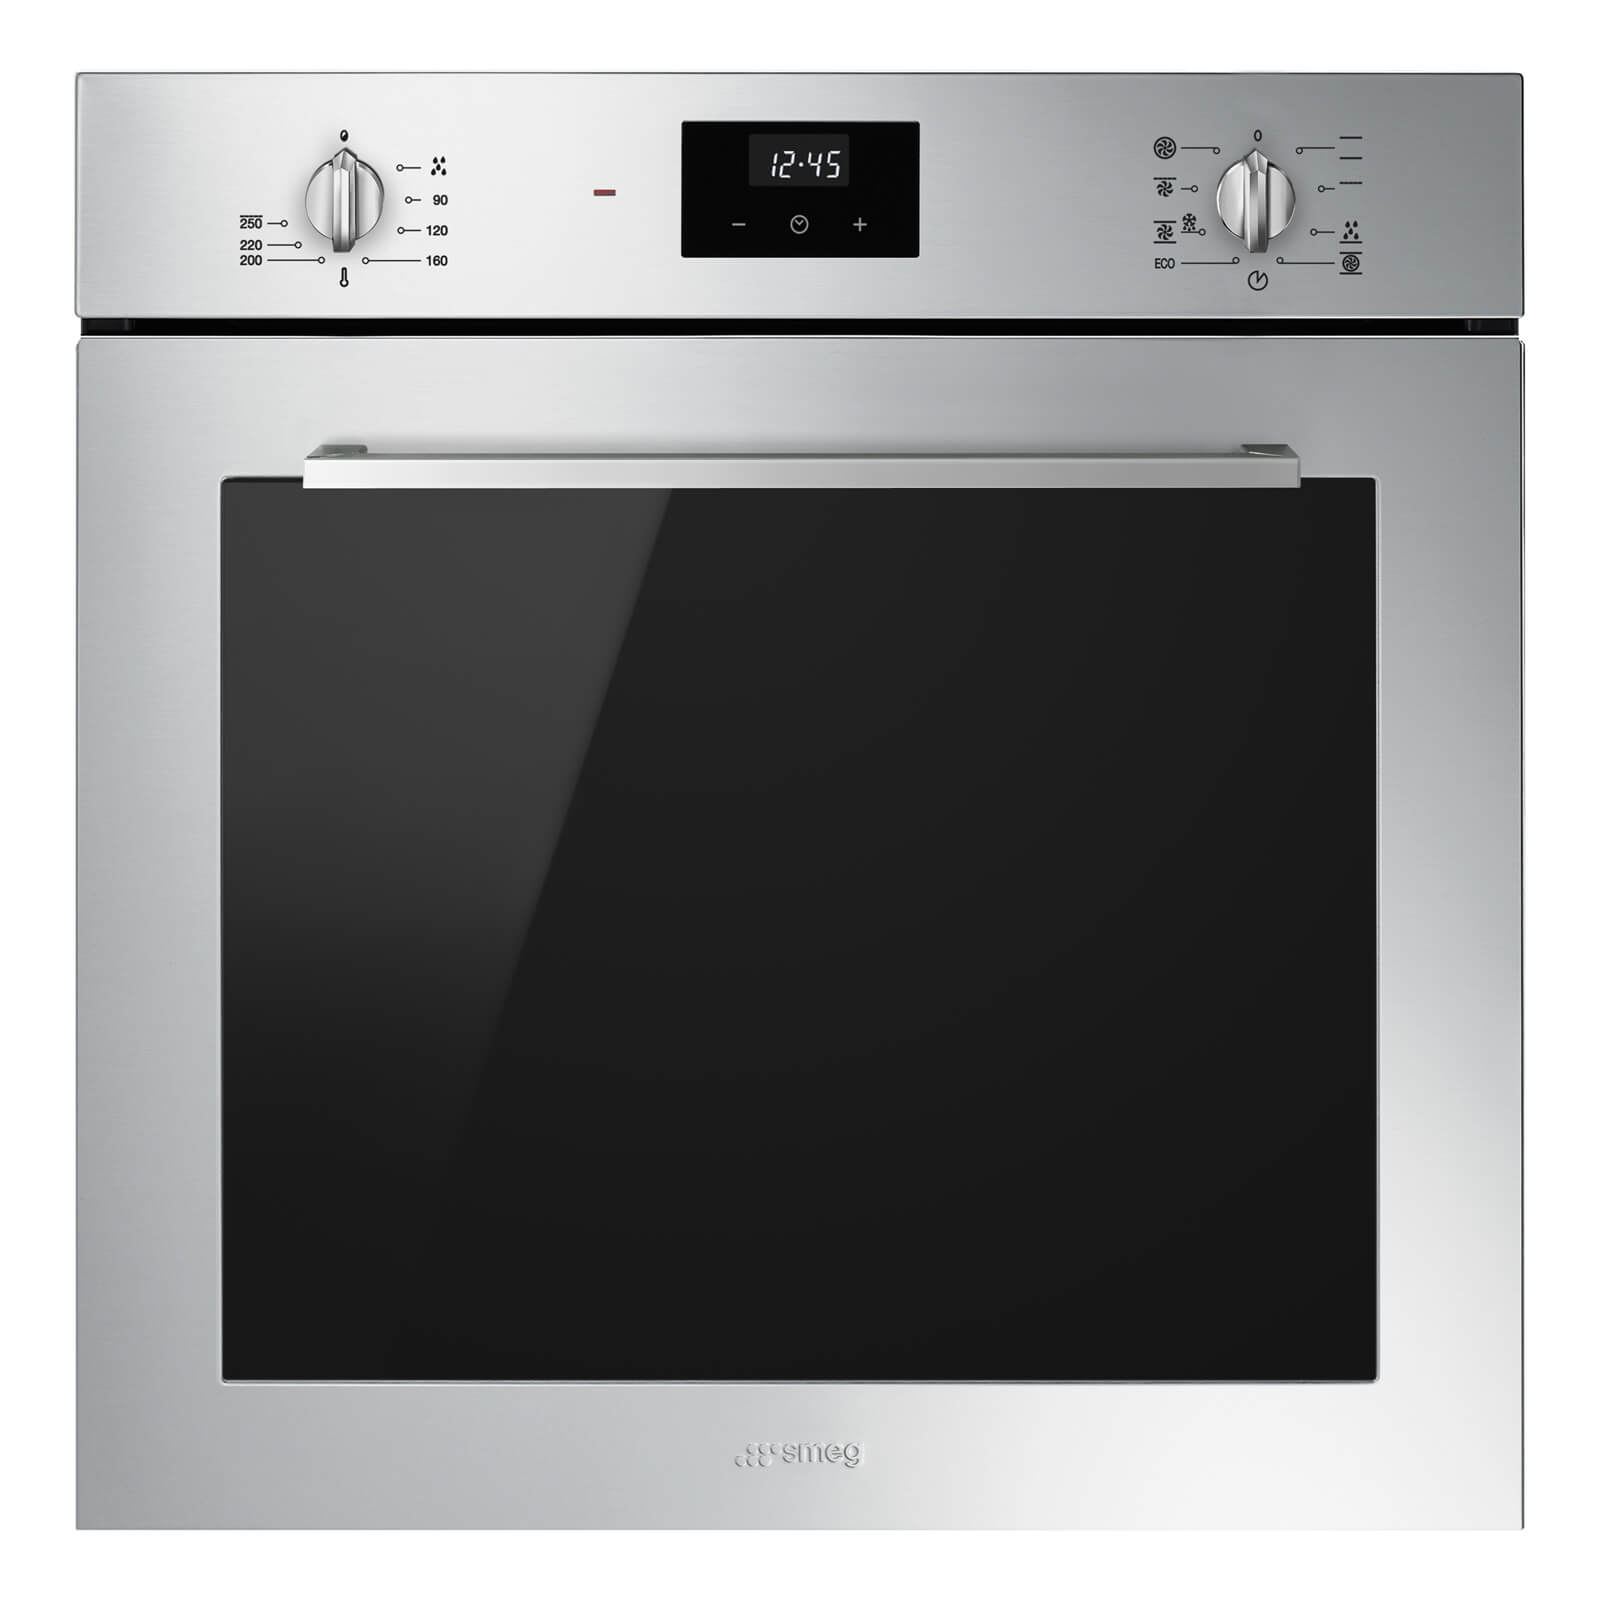 Smeg SF6400TVX 60cm Single Electric Oven - Stainless Steel